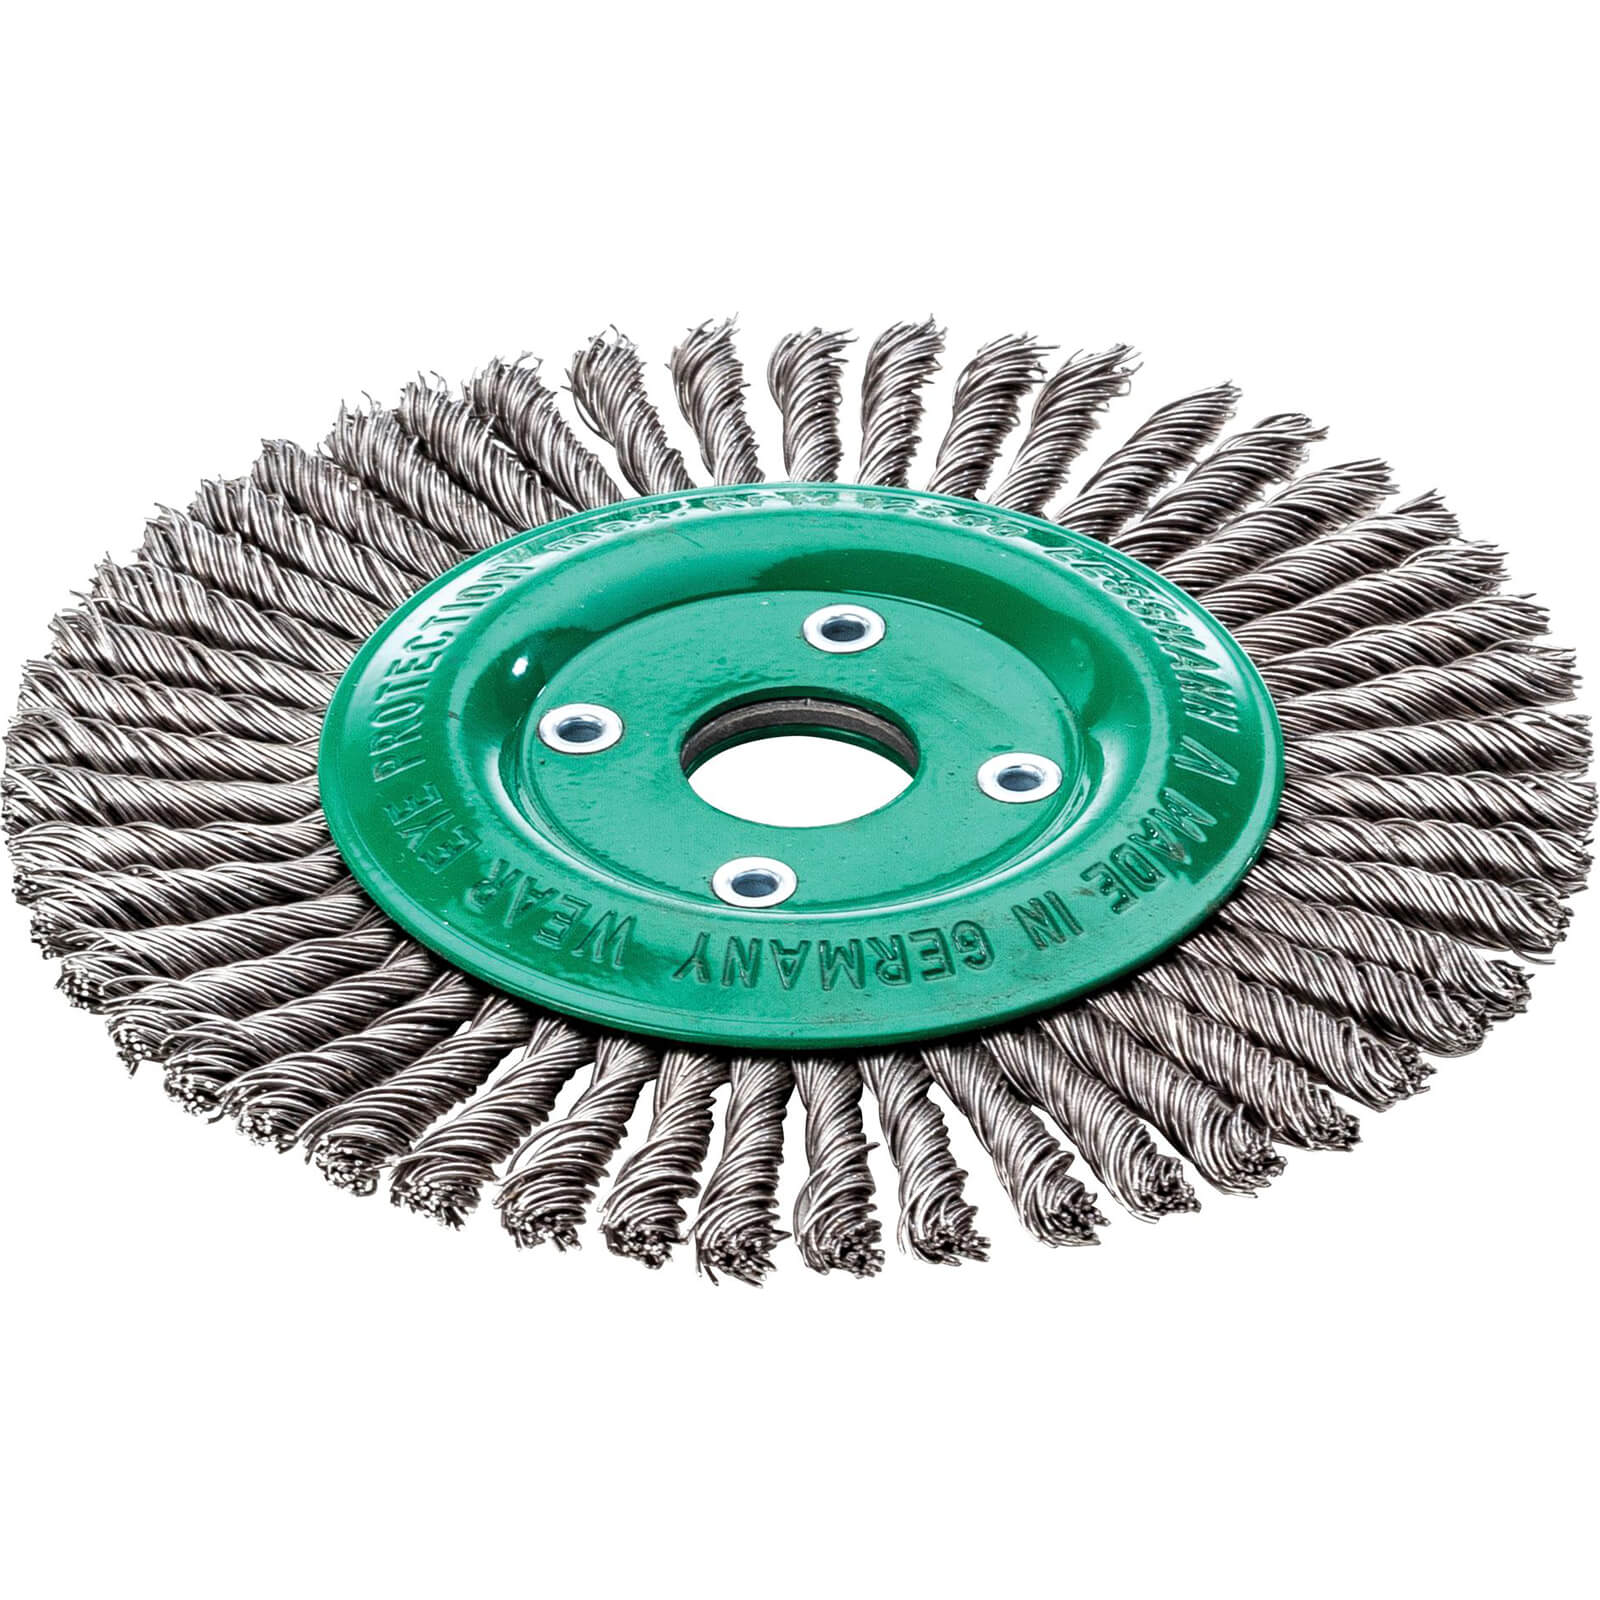 Image of Lessmann Pipeline Stainless Steel Wire Wheel Brush 125mm 22.2mm Bore